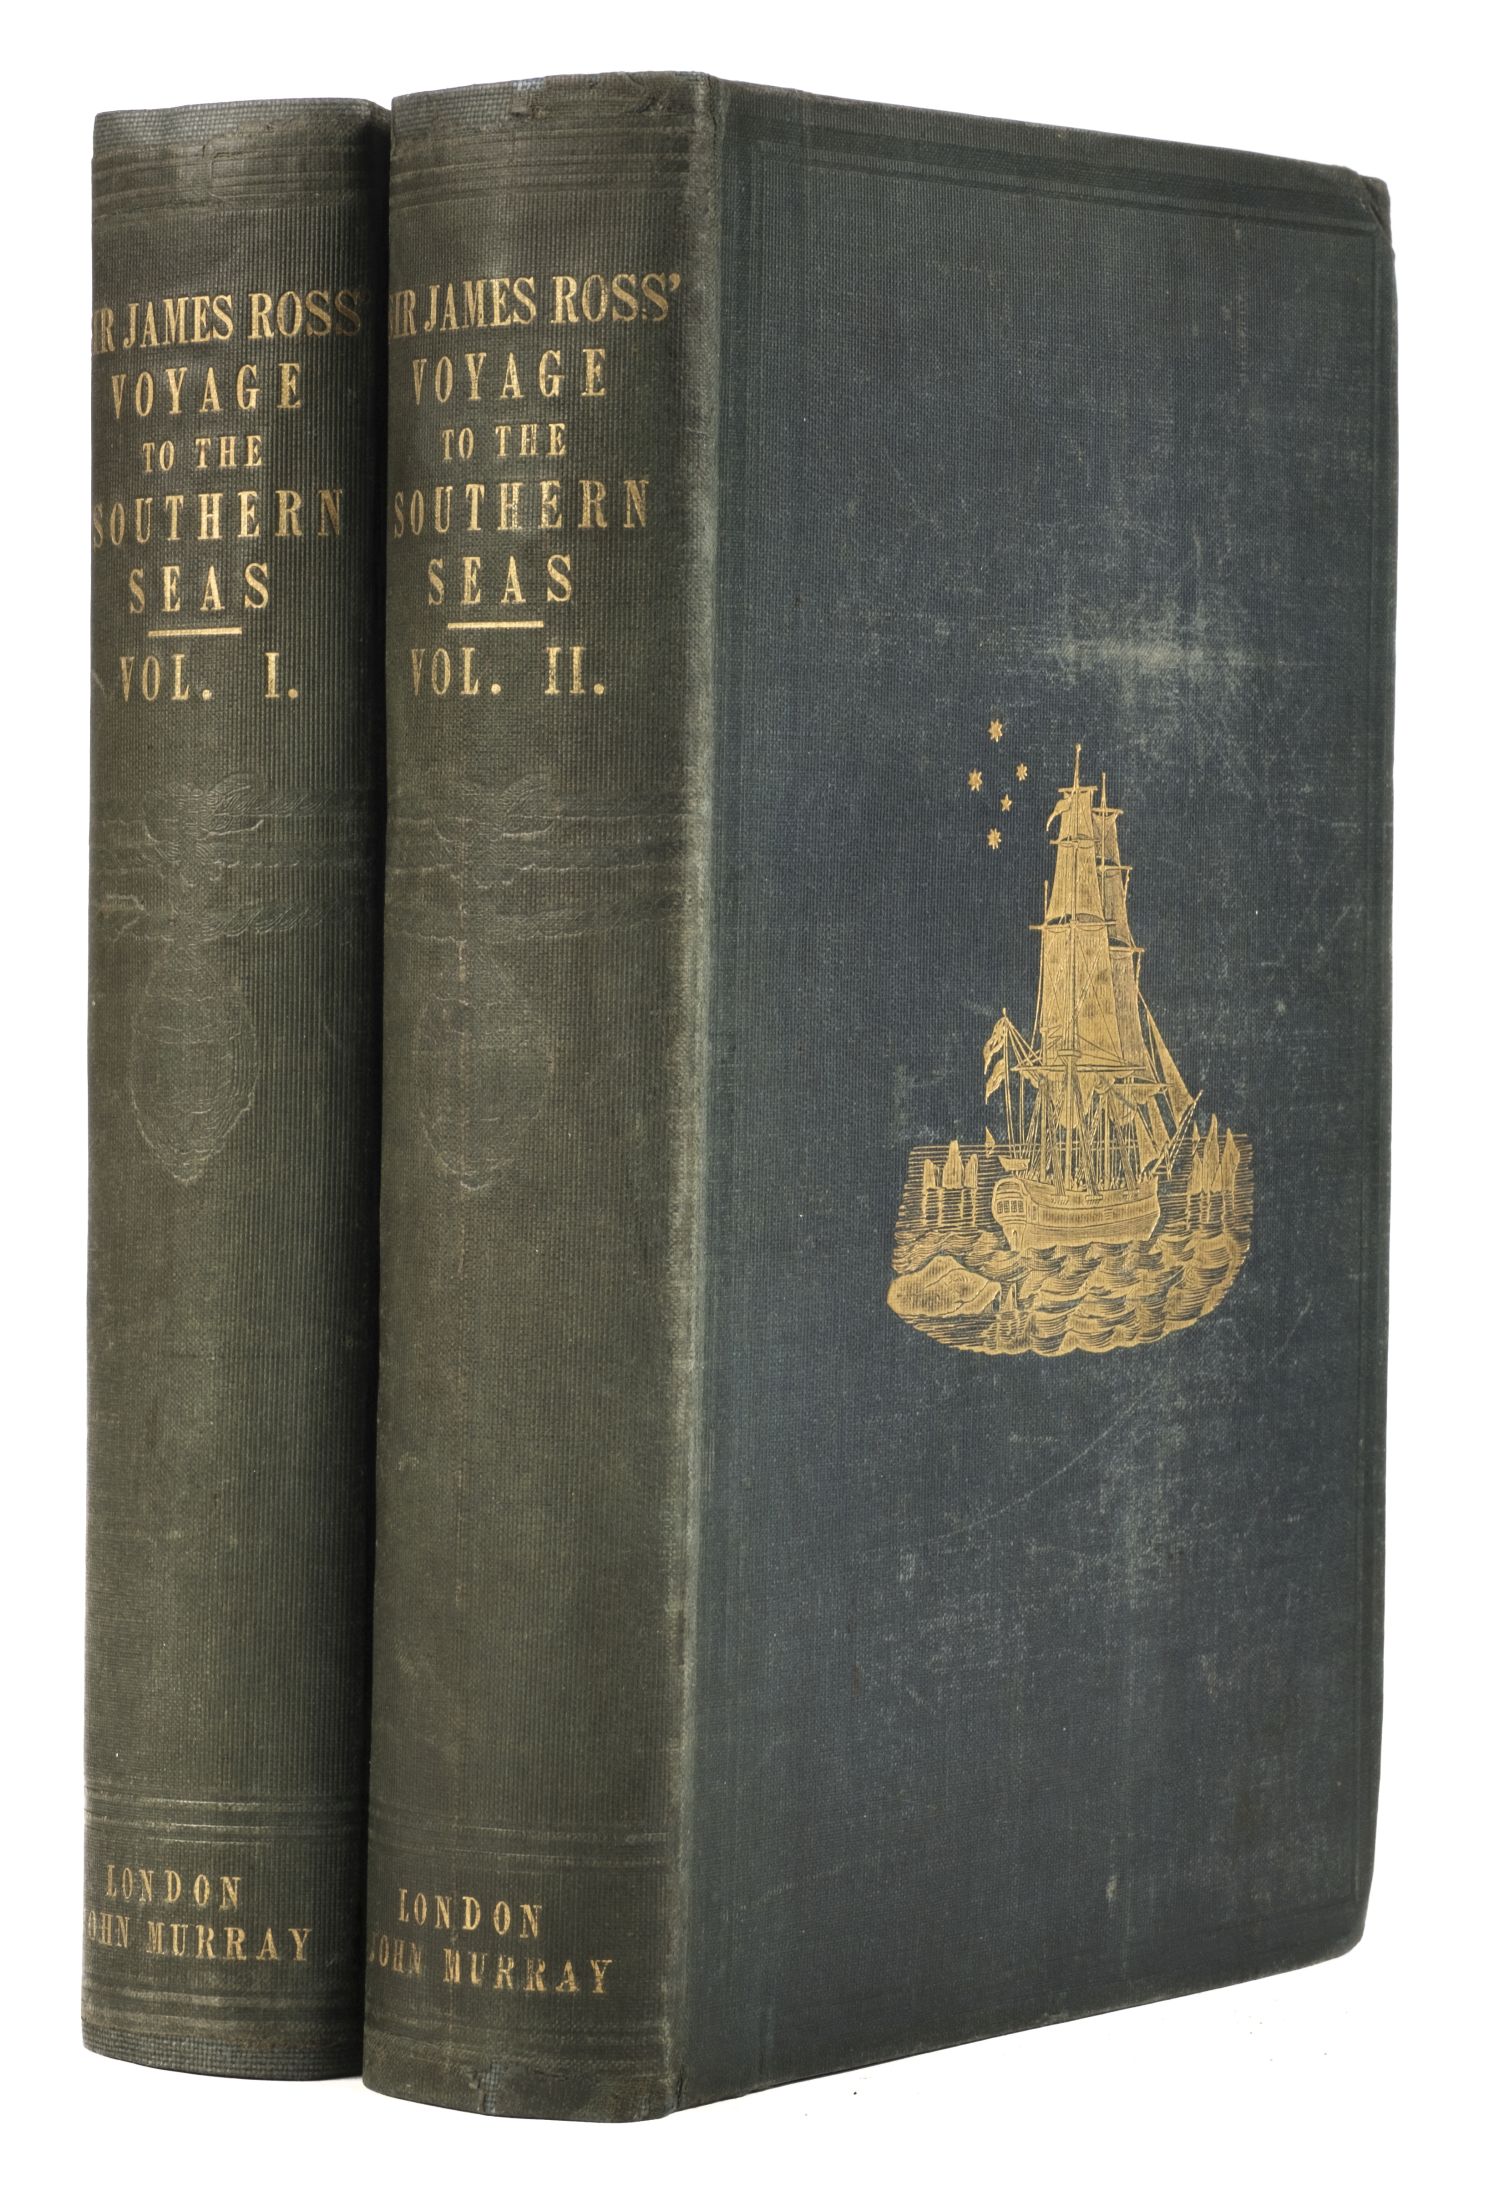 Ross (J. C.). A Voyage of Discovery and Research in the Southern and Antarctic Regions, 1847